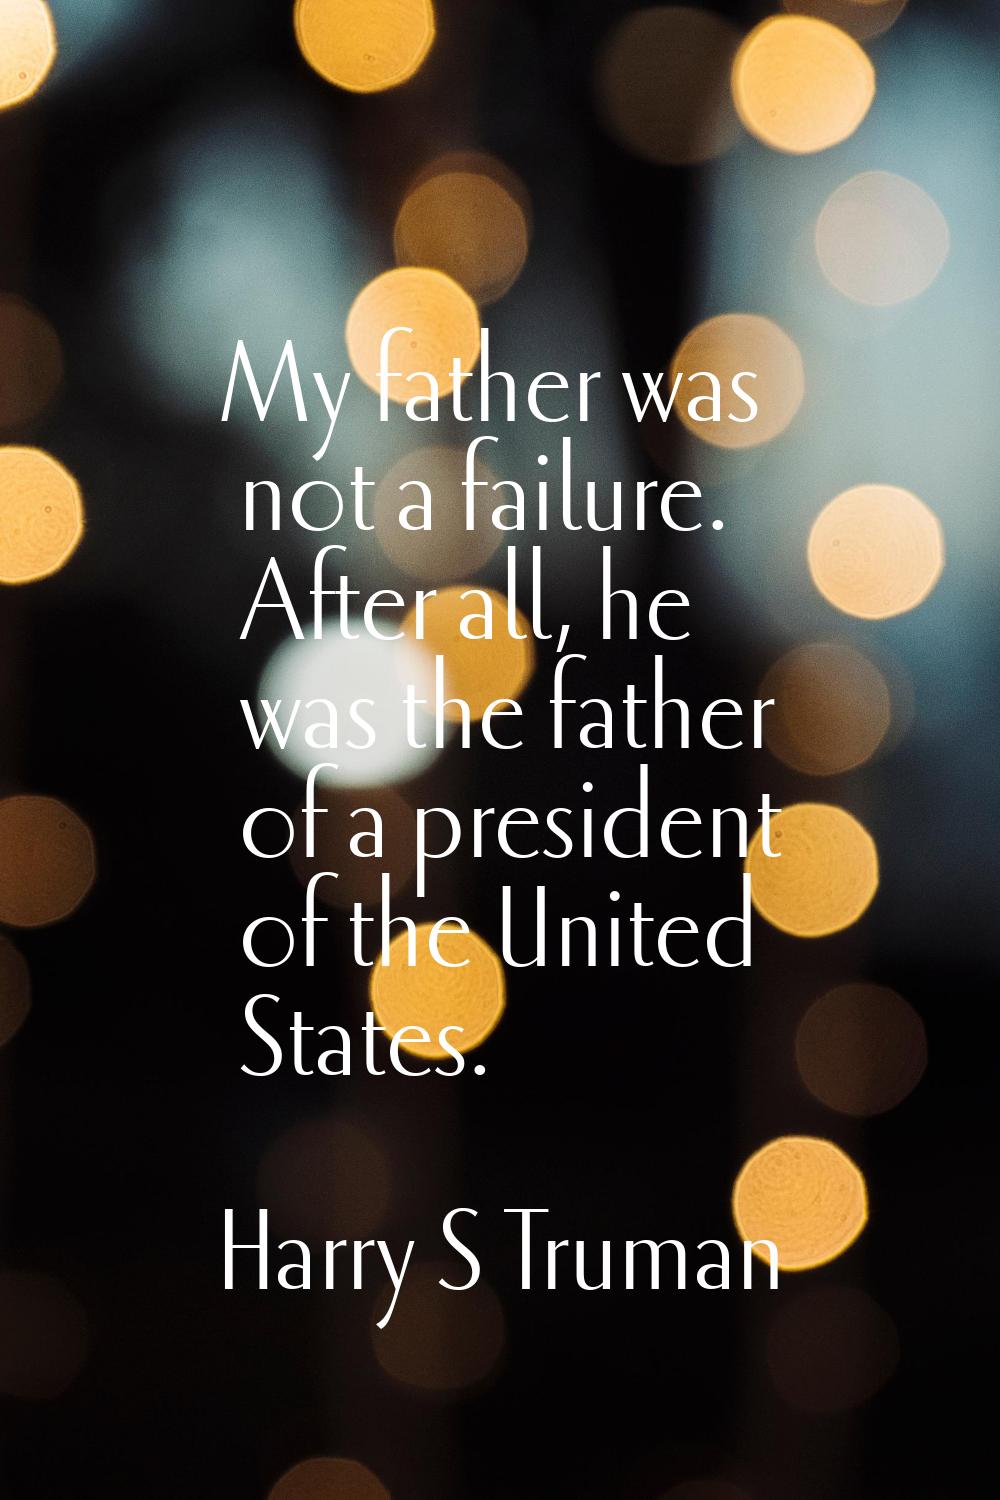 My father was not a failure. After all, he was the father of a president of the United States.